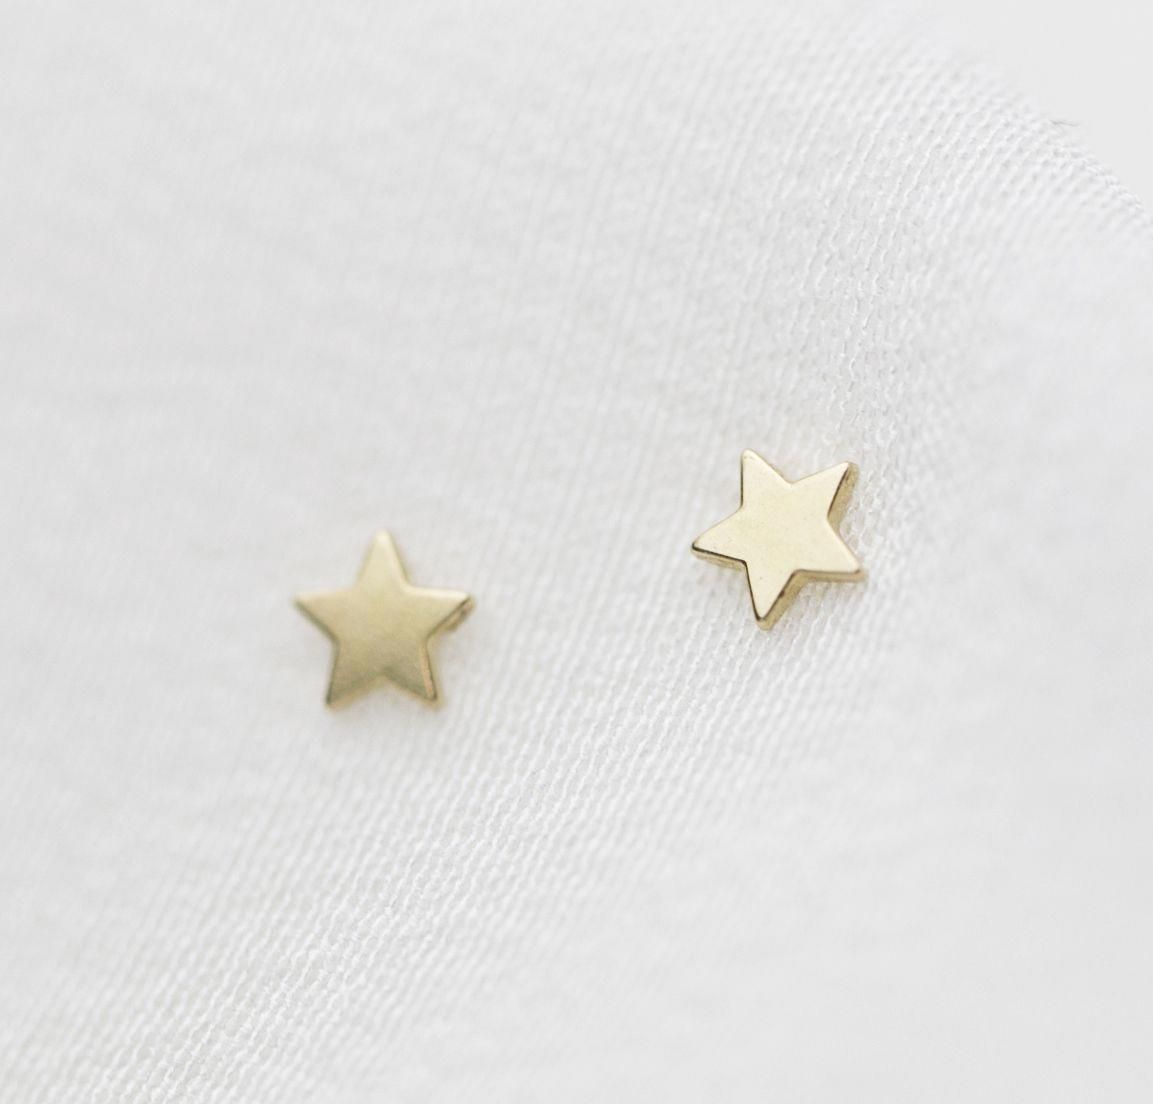 Tiny Silver Stud Earrings – dainty studs/ minimal earrings/ simple sparkly studs/ pave studs/ gifts for her/ bridesmaid gift/ birthday gift